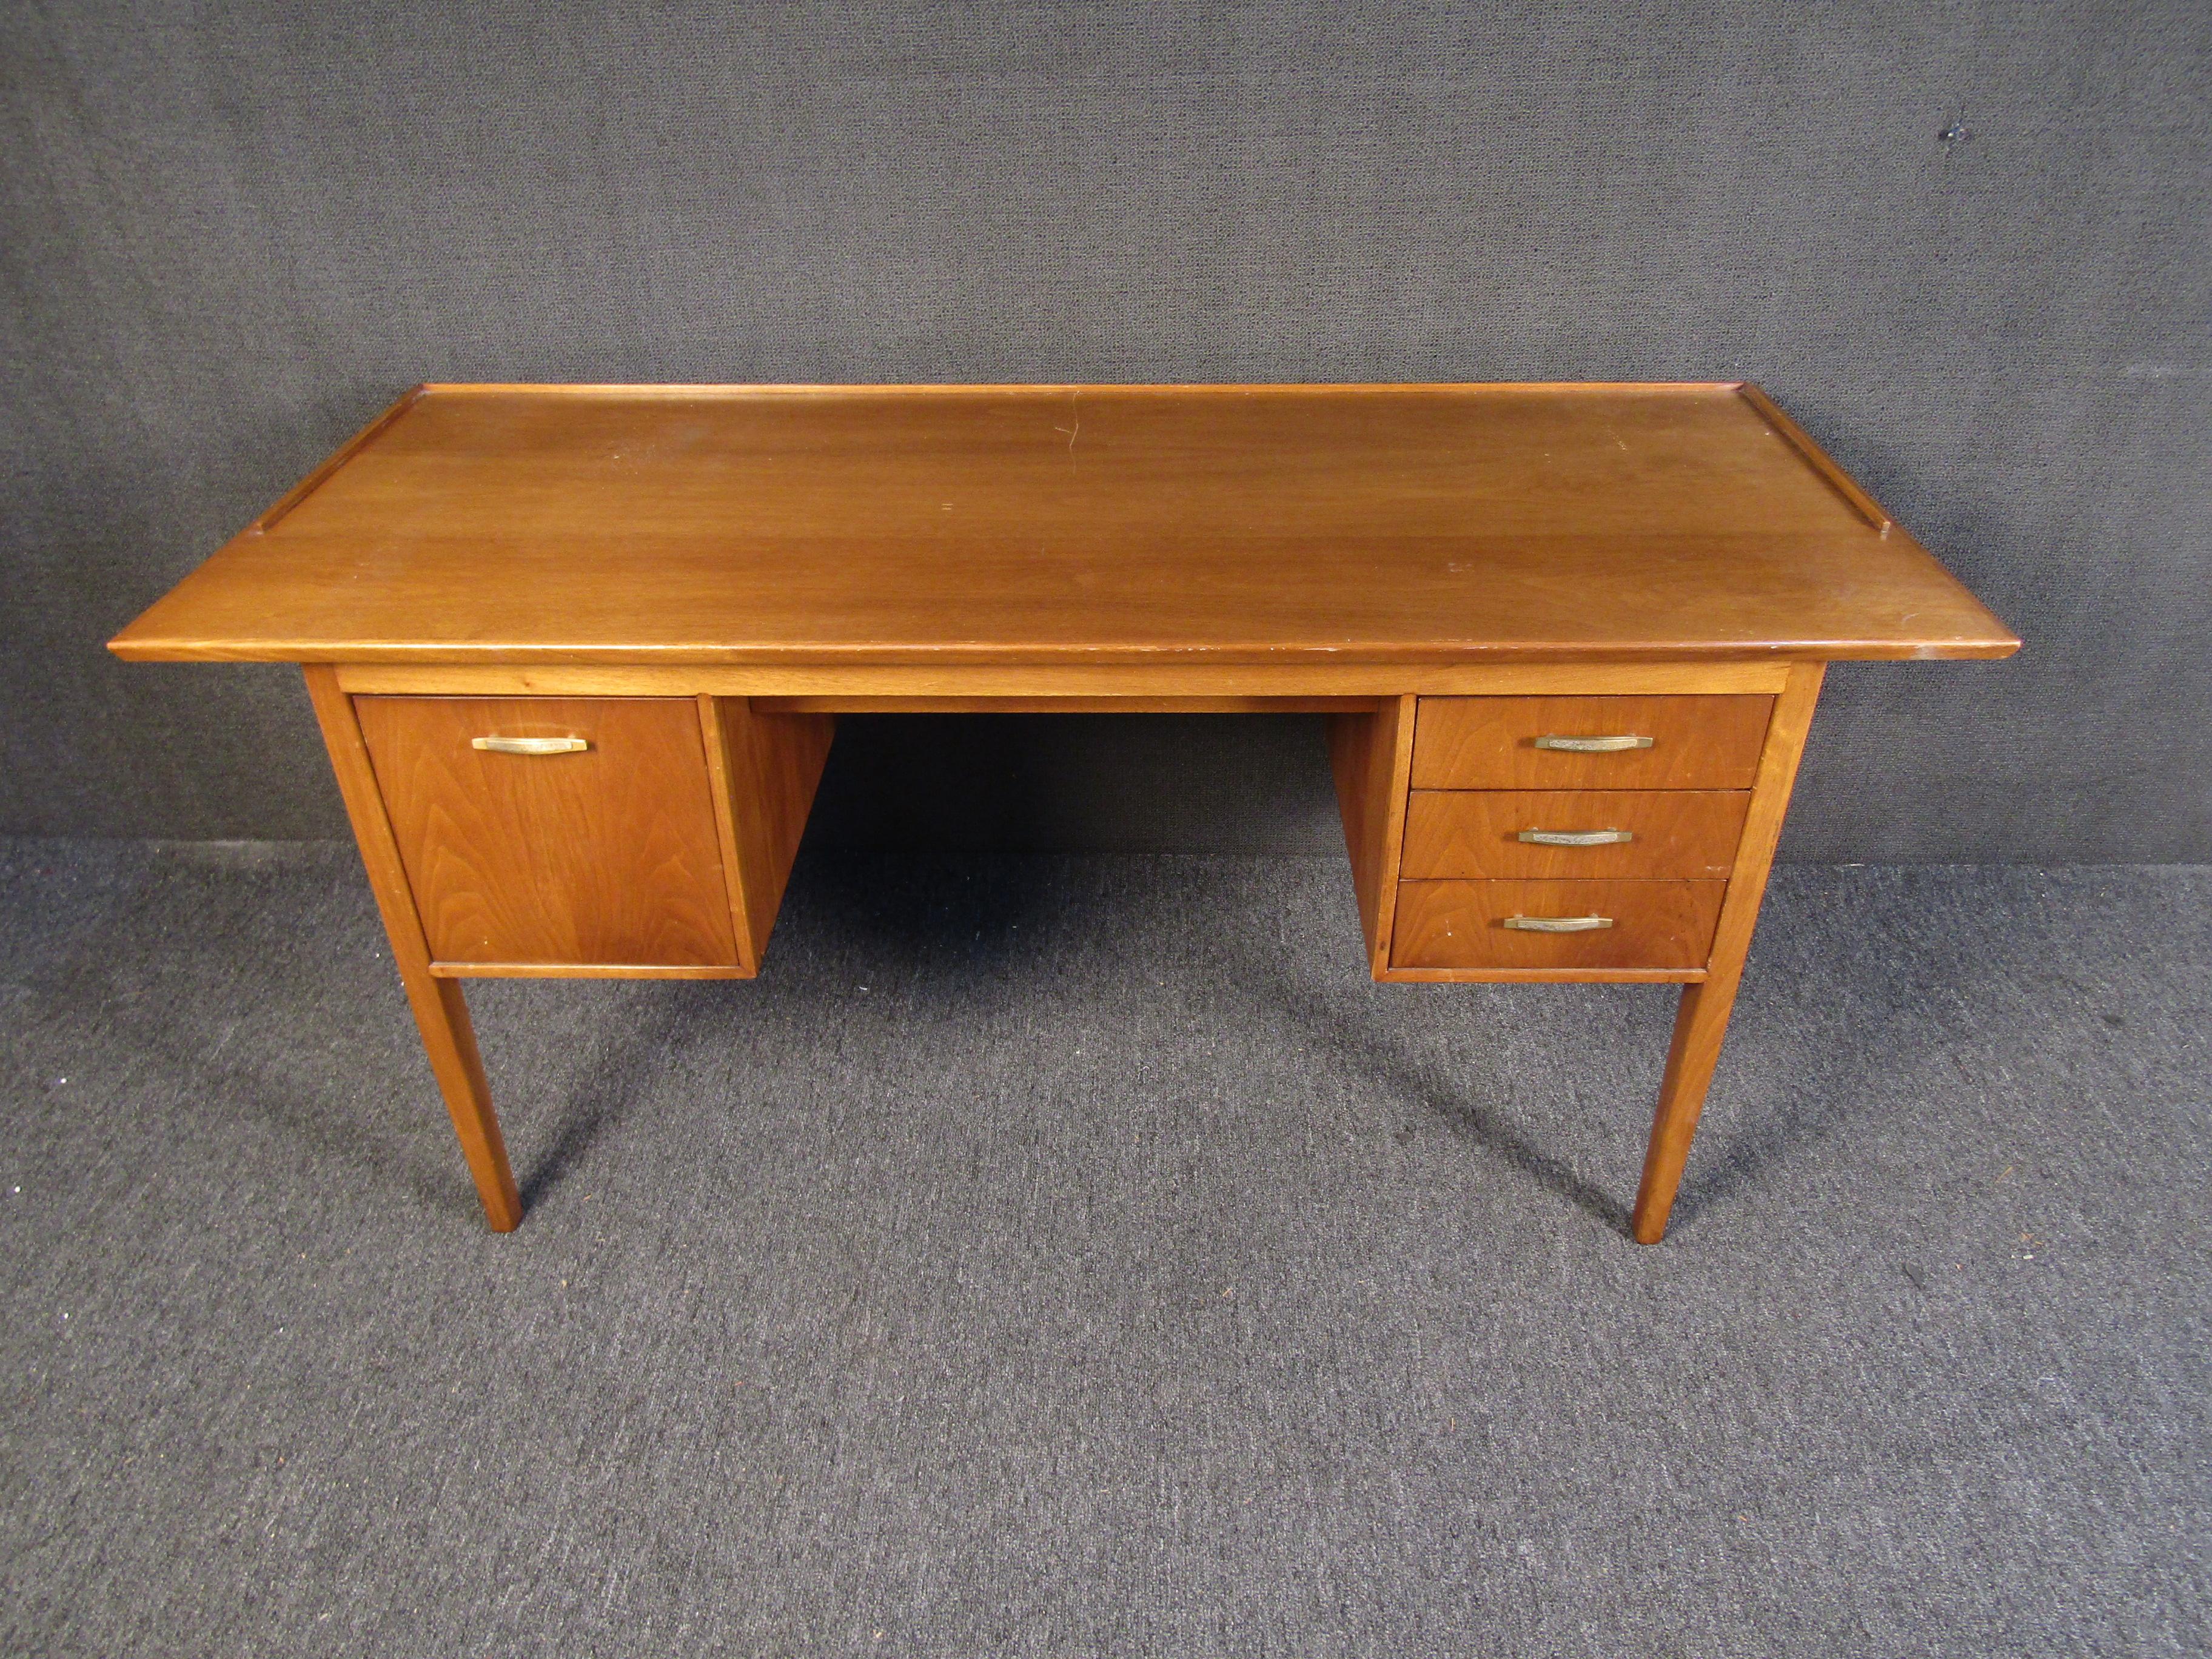 Mid-Century Modern writing desk combining sturdy quality with great design. Manufactured by Drexel Furniture of North Carolina for their 